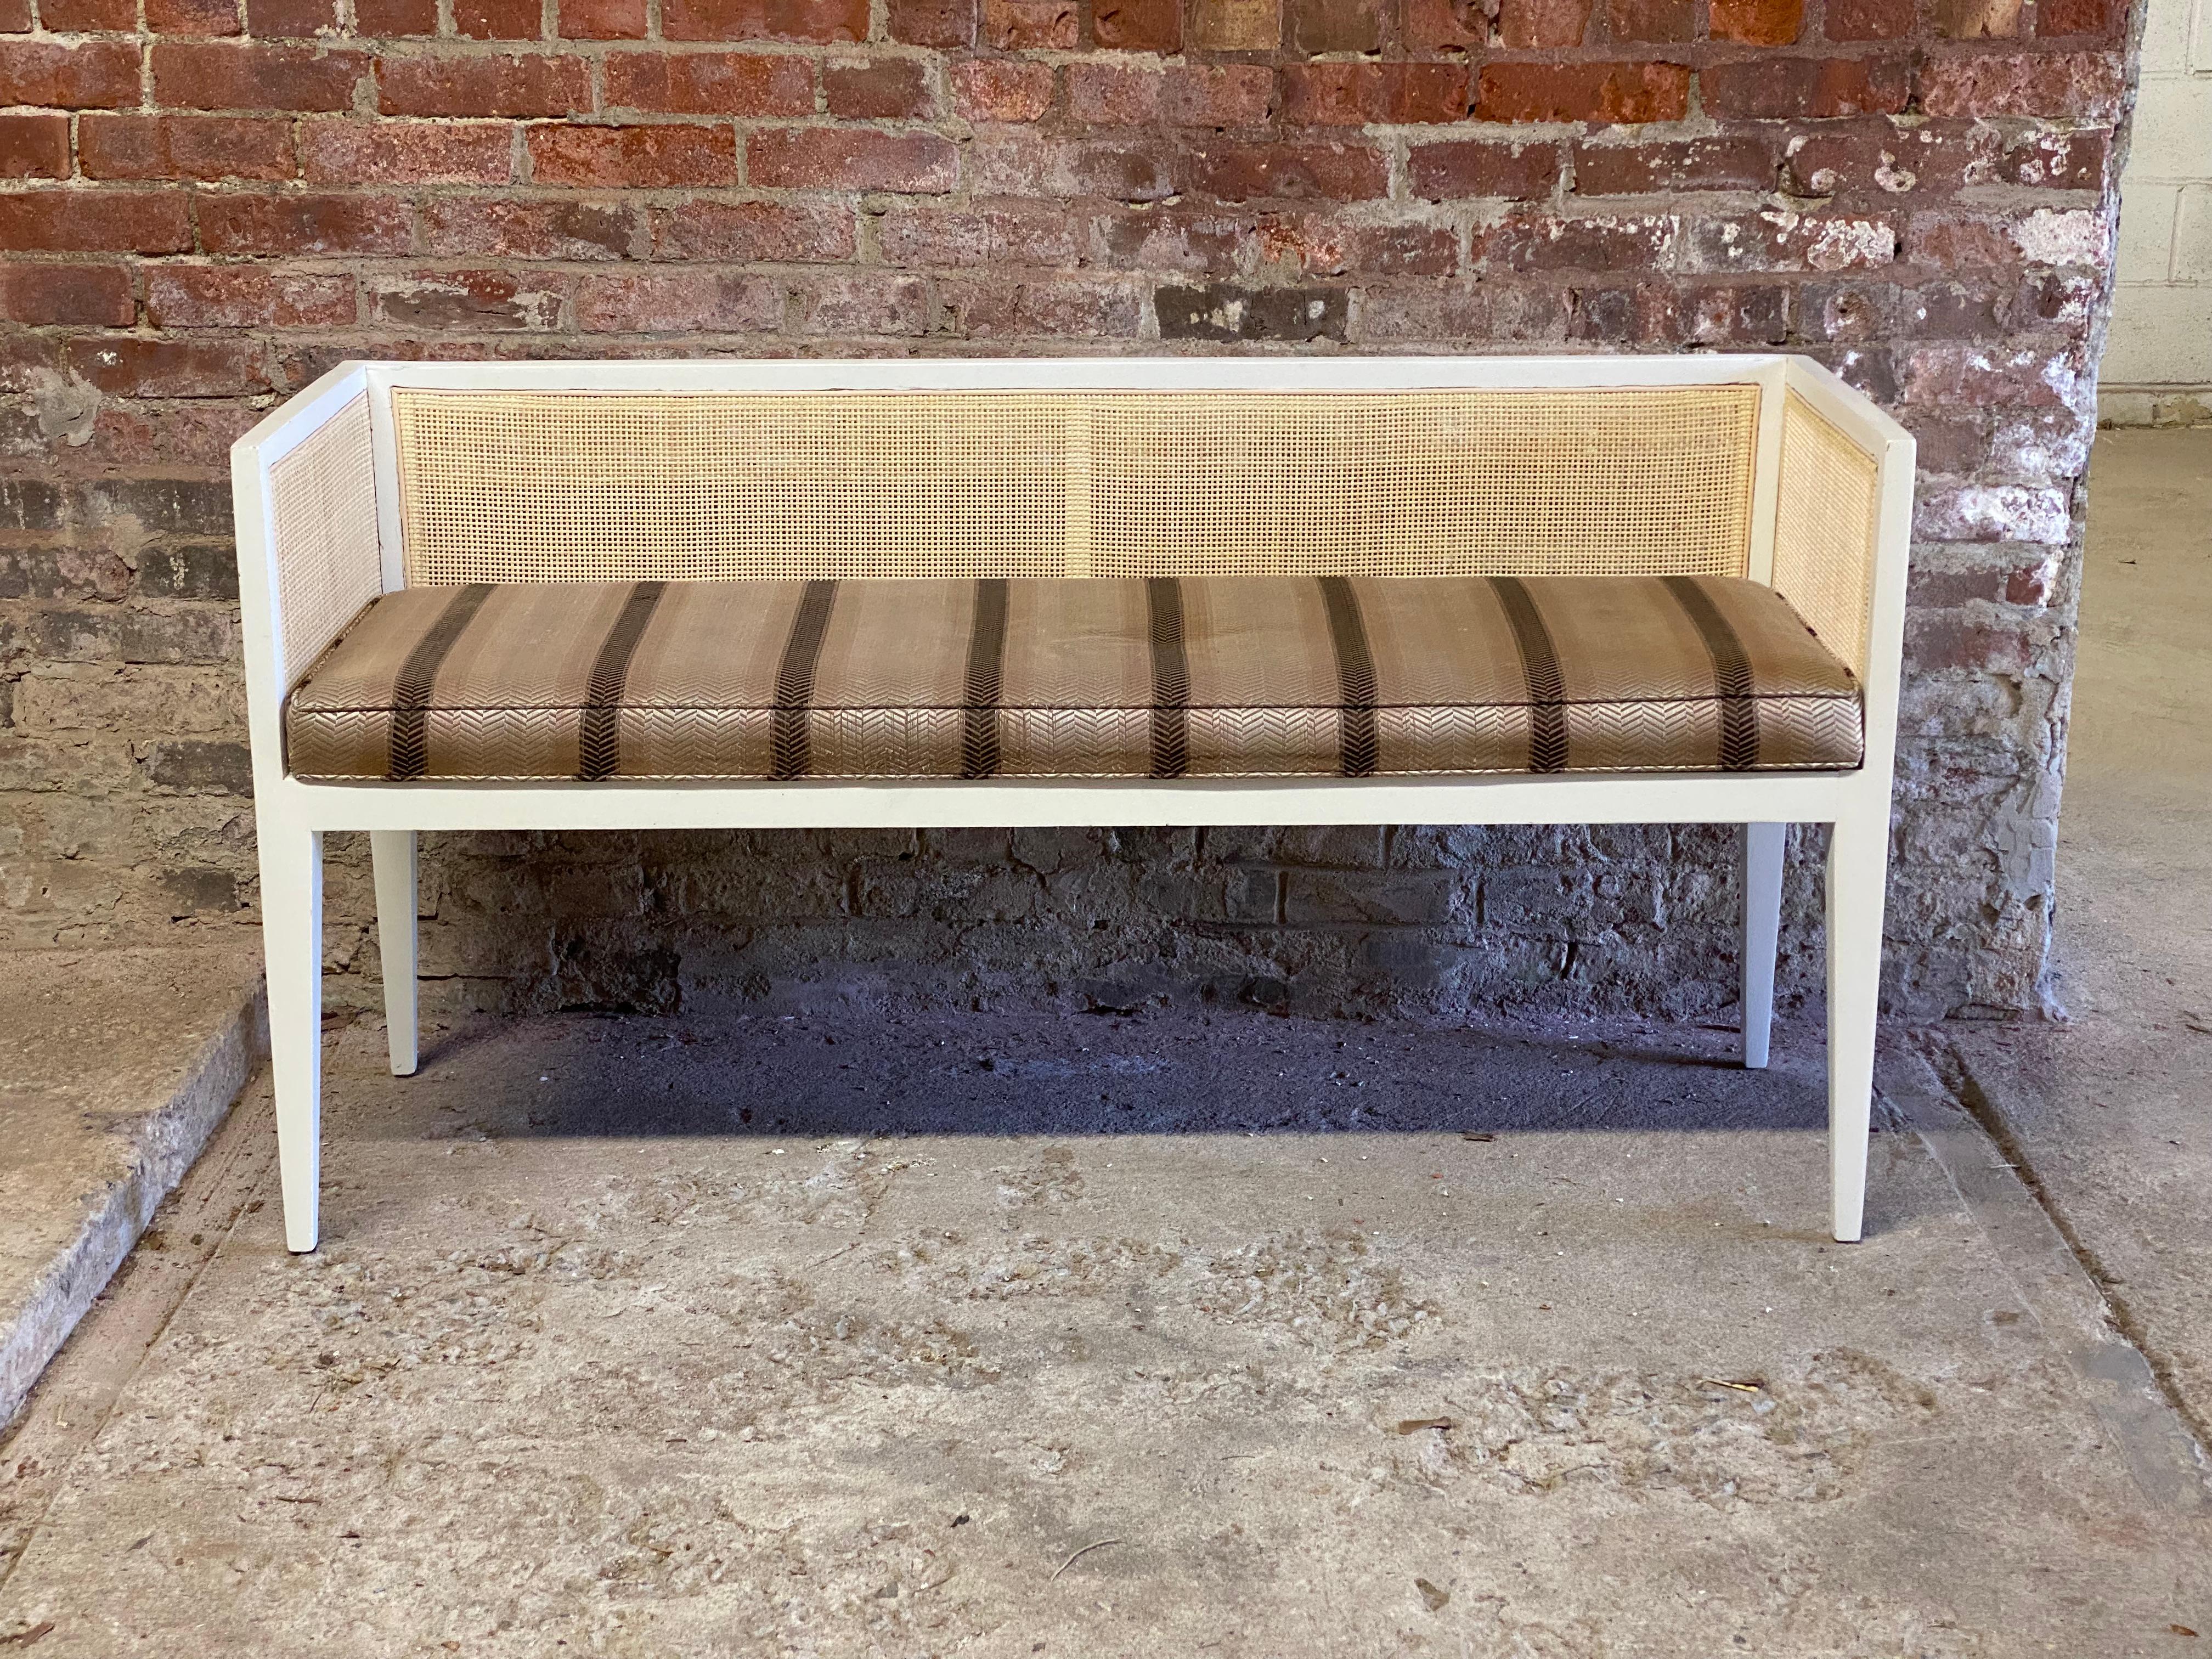 Caned back and upholstered bench. Circa 1960-70. Newly caned back with an upholstered drop in seat. Featuring older custom white finish with tapered legs and level arm and back support. A wonderful addition to the foyer, hallway or underneath a